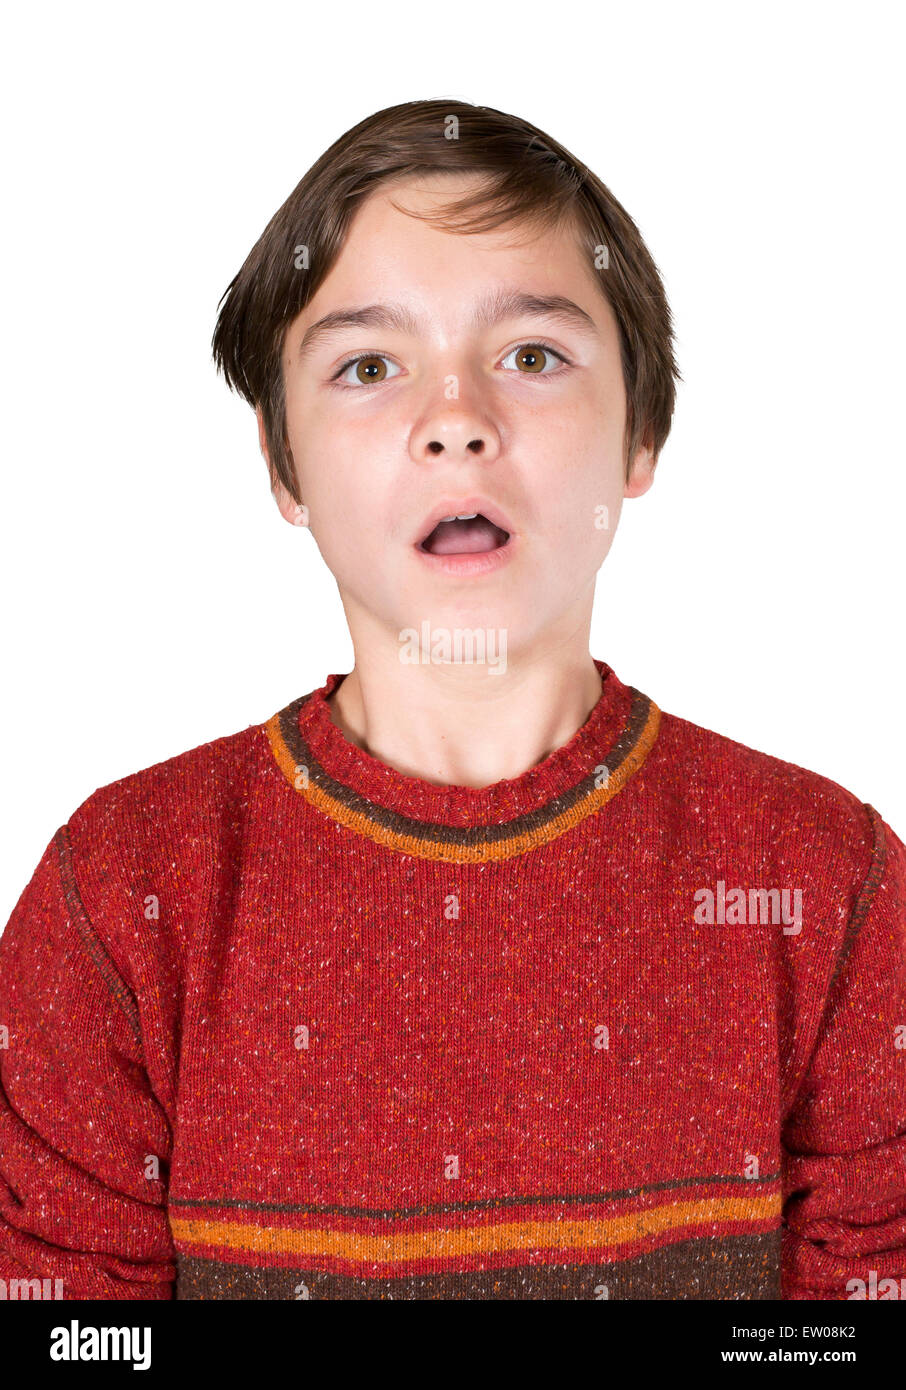 portrait of a young boy looking surprised Stock Photo